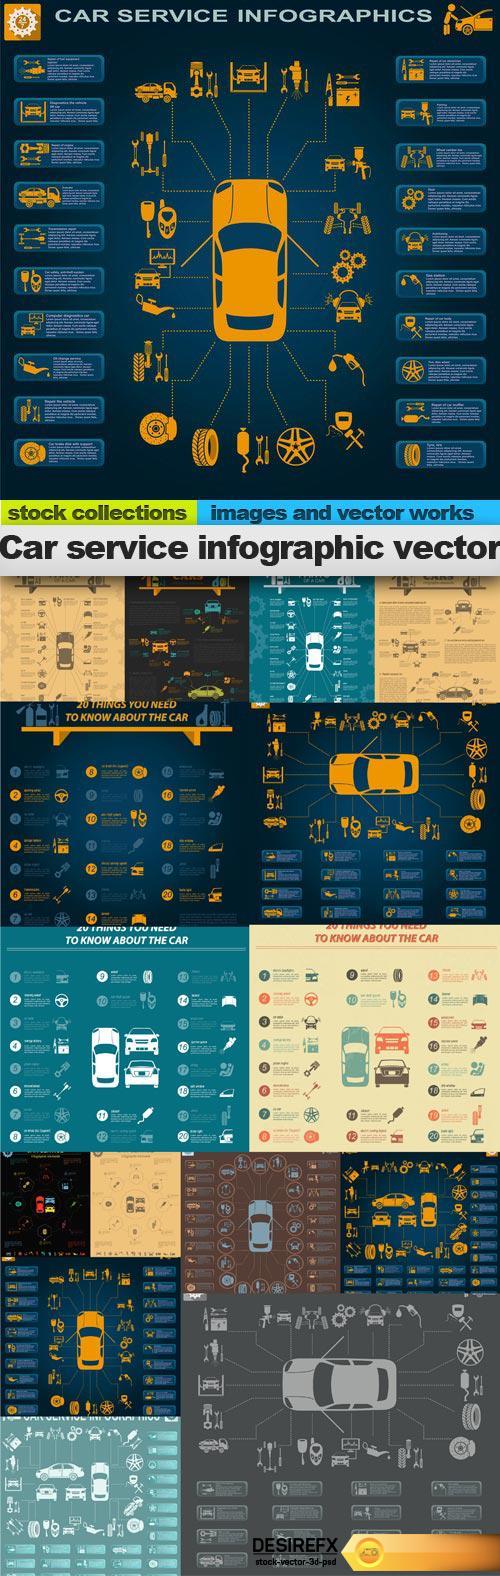 Car service infographic vector, 15 x EPS